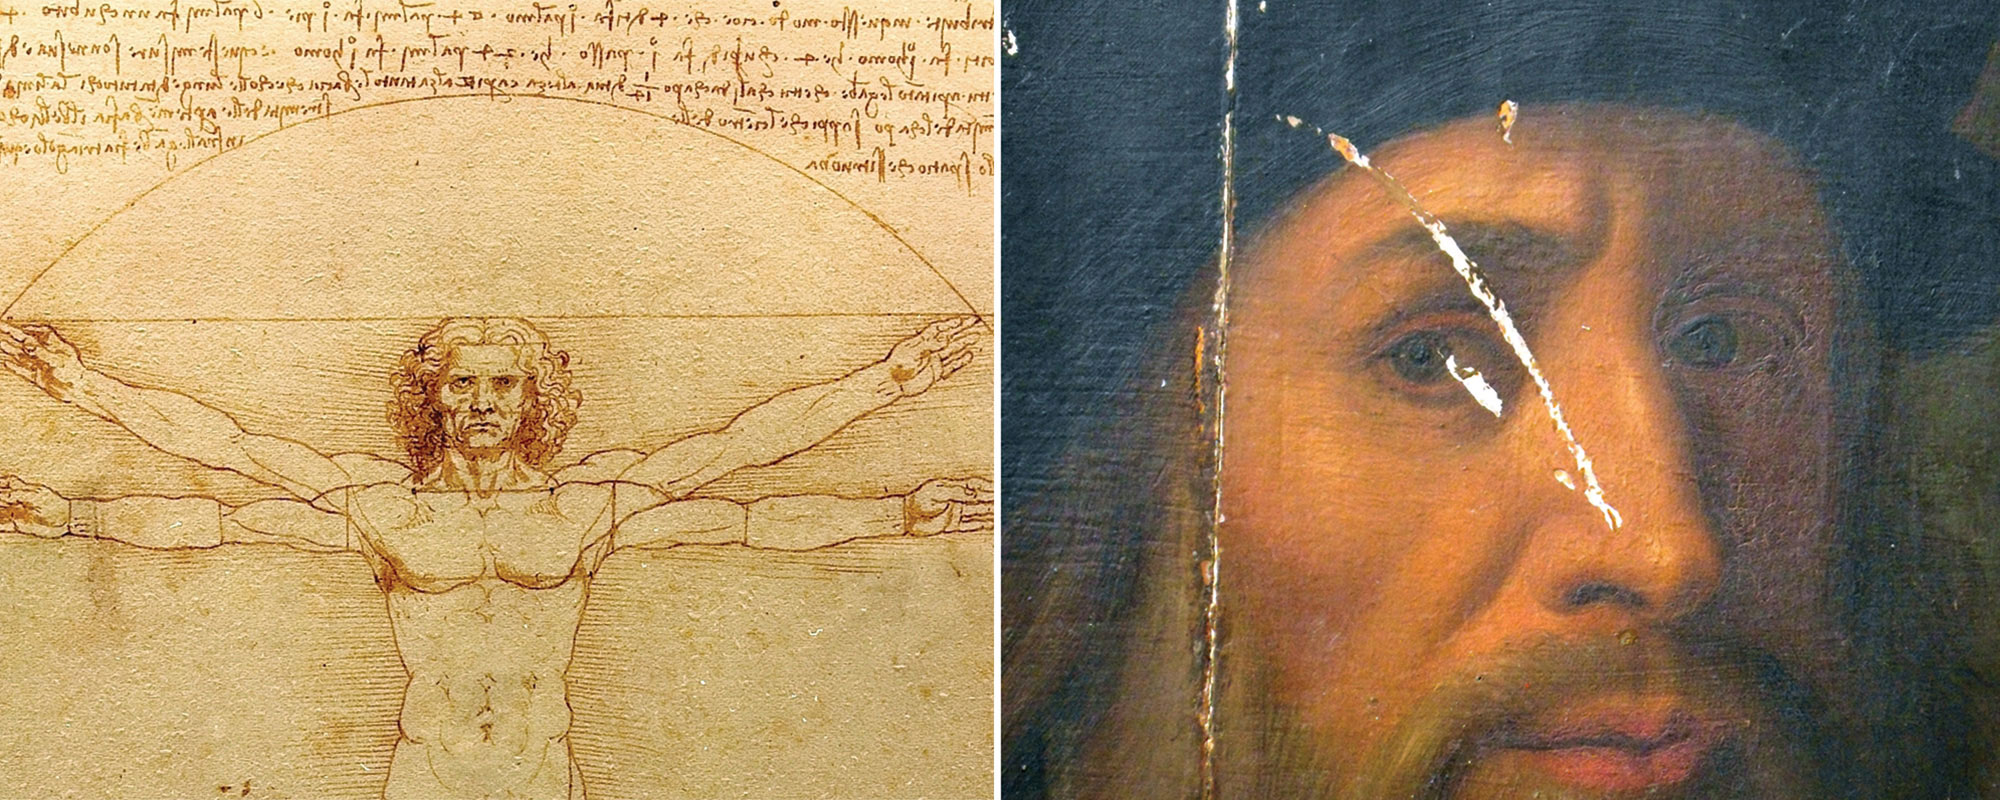 side by side images of Da Vinci's Vitruvian Man and a closely cropped painting beleived to be of Leonardo Da Vinci.